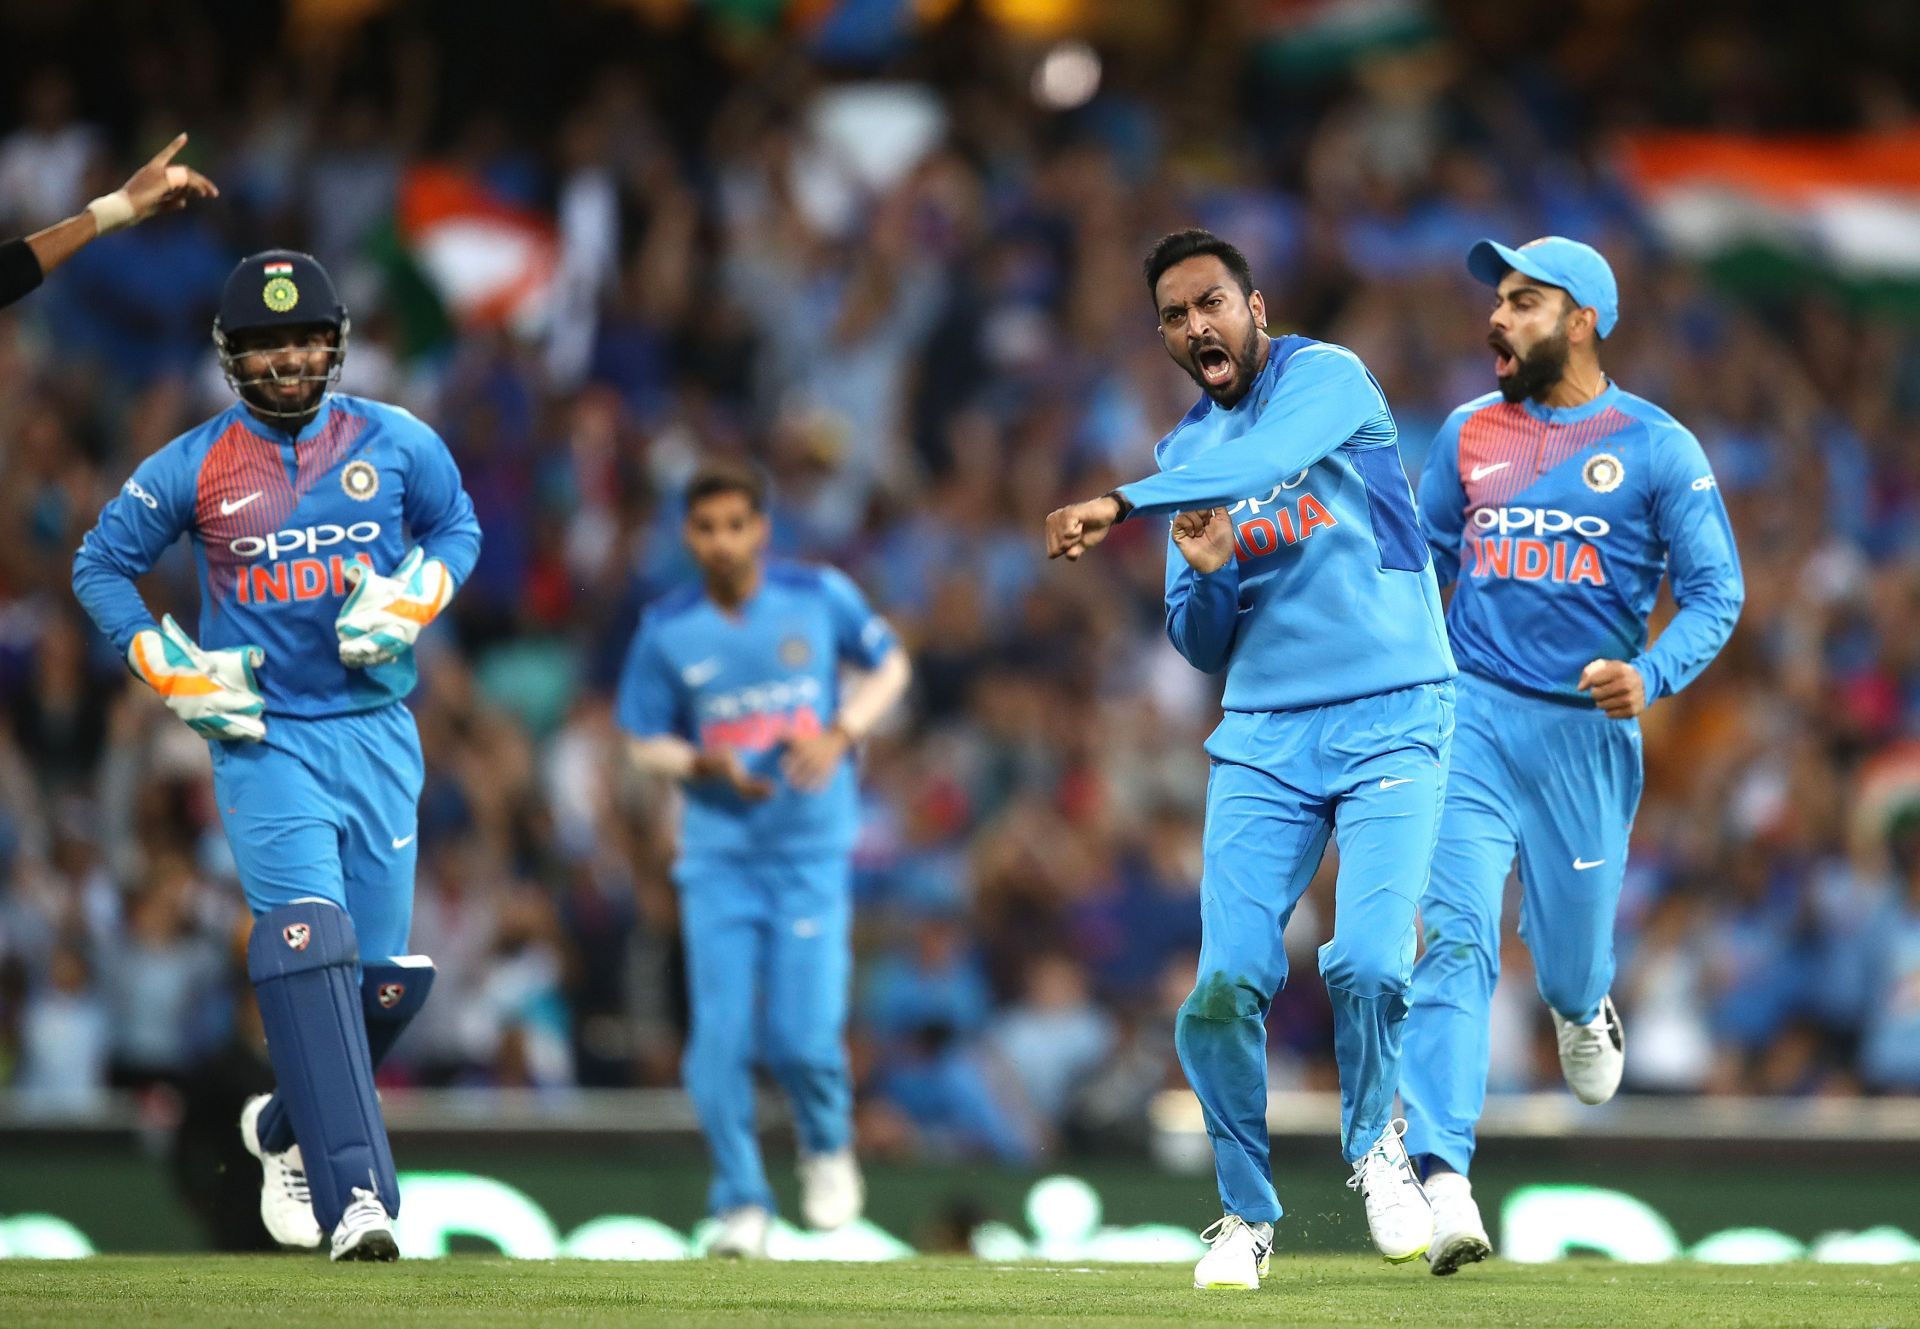 Team India left-arm spinner Krunal Pandya celebrates after taking the wicket of Ben McDermott in the 2018 Sydney T20I. Pic: Getty Images